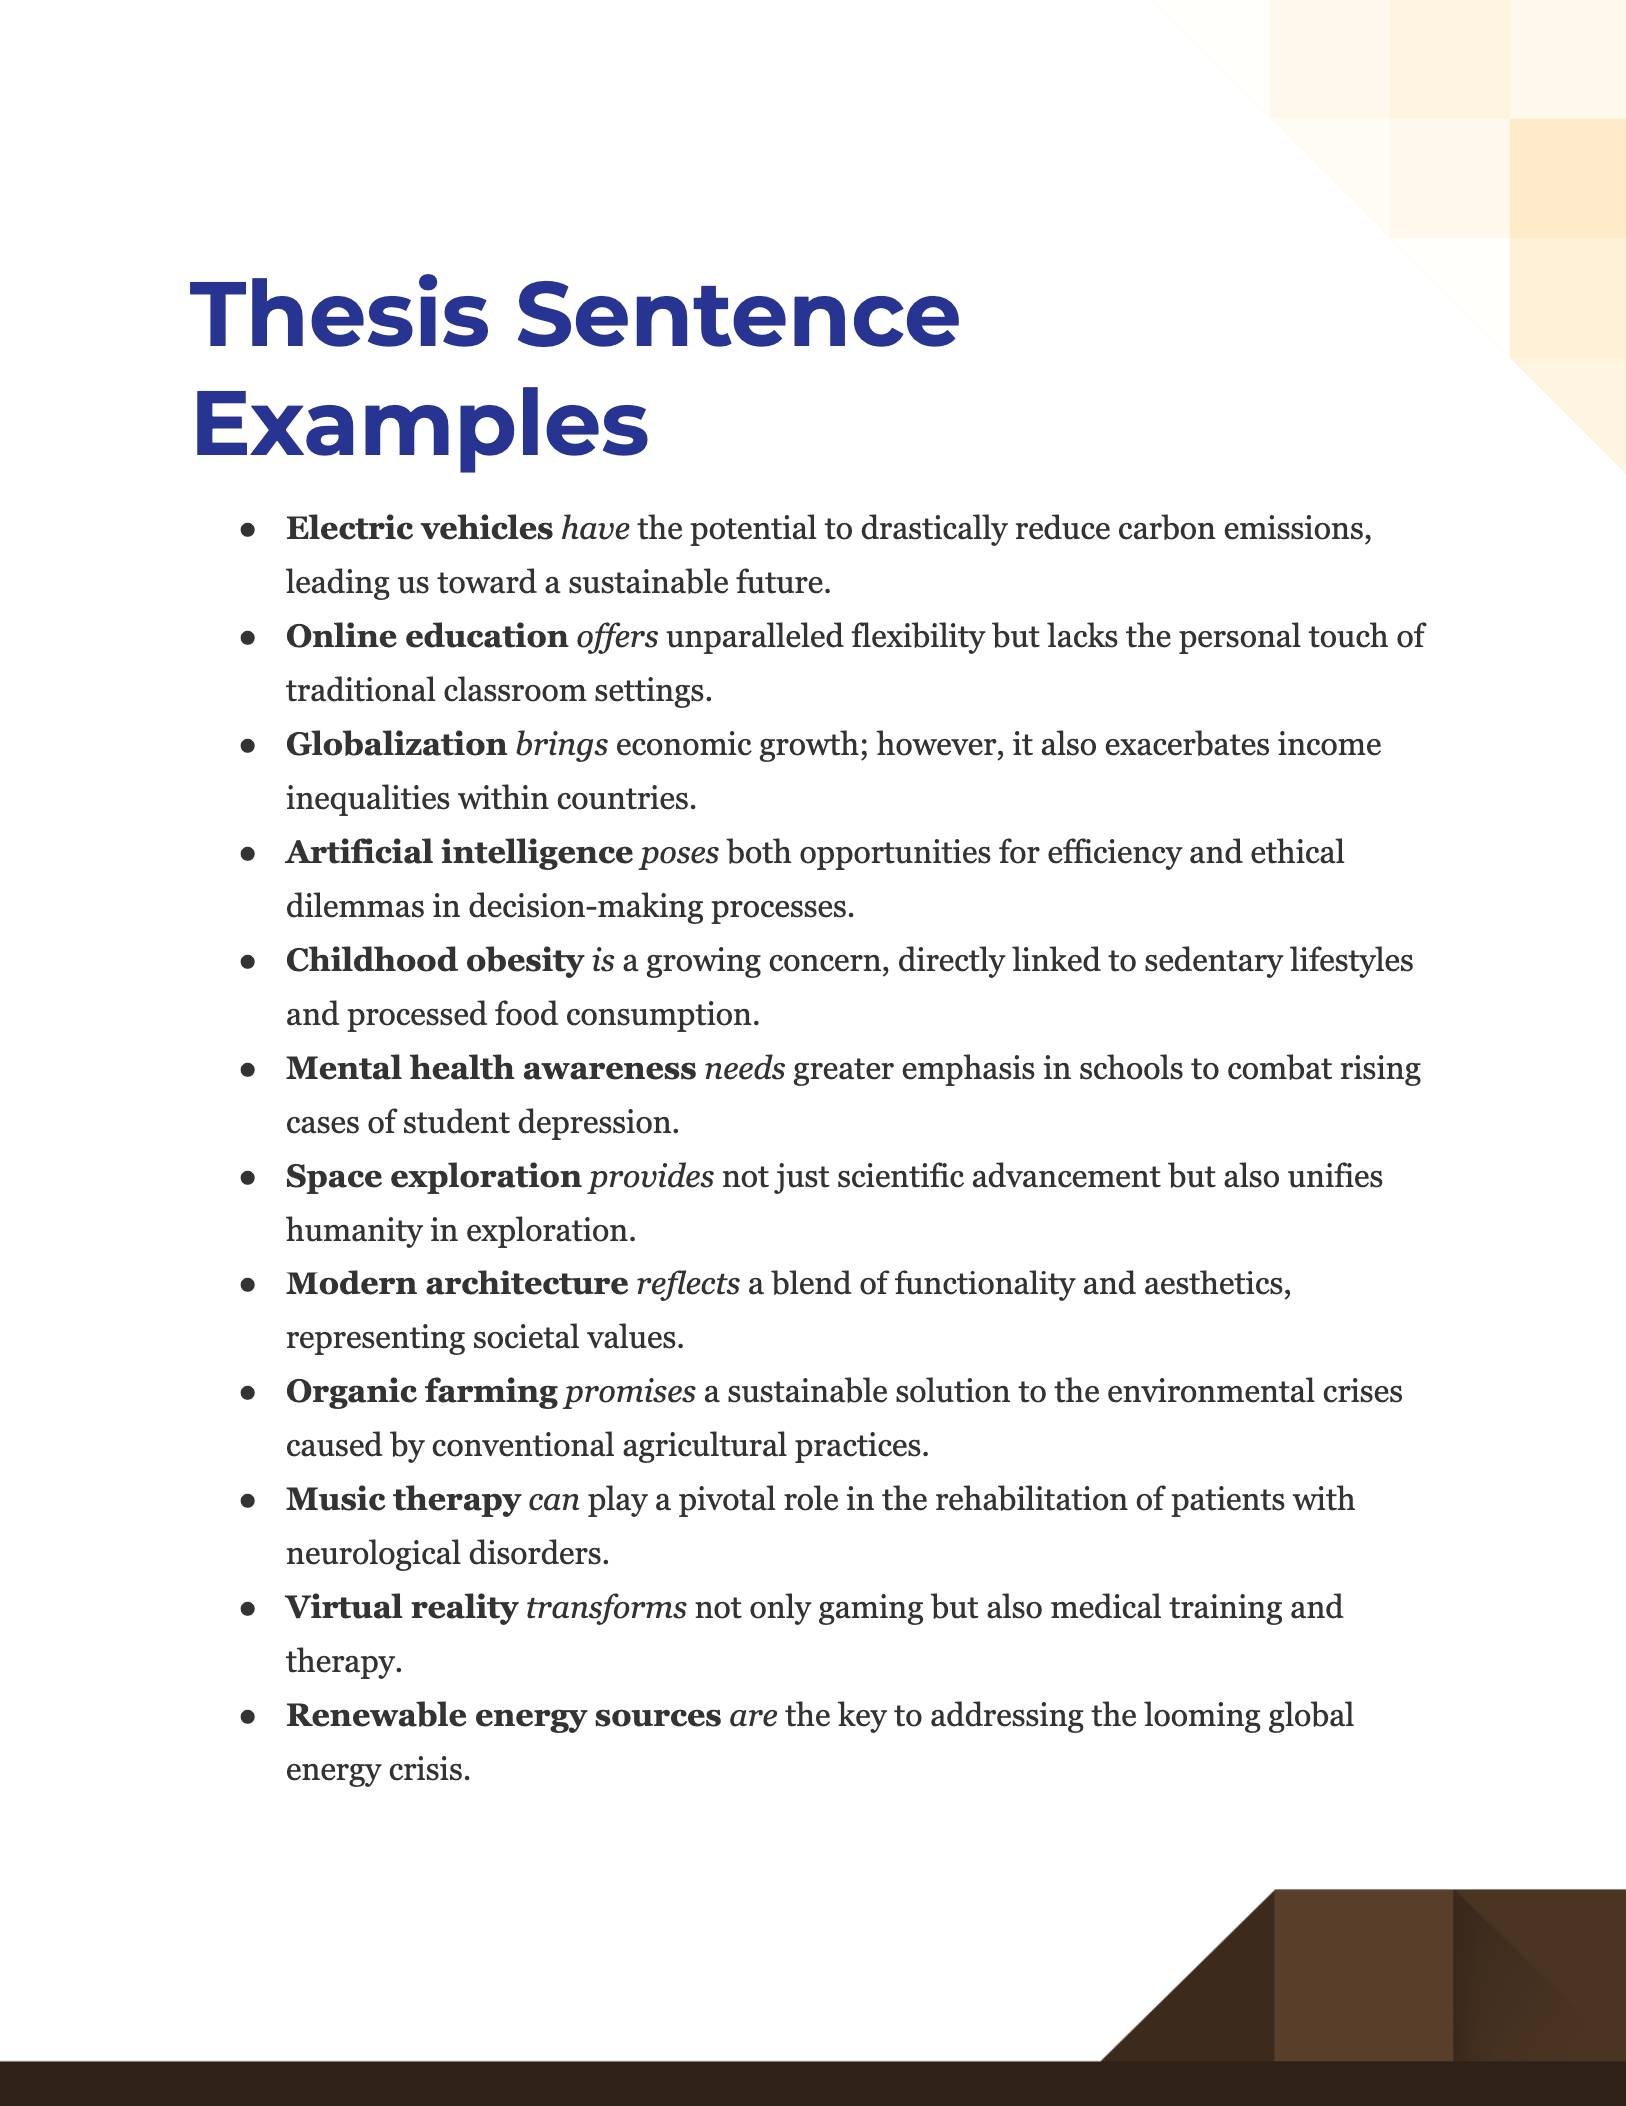 small sentence for thesis